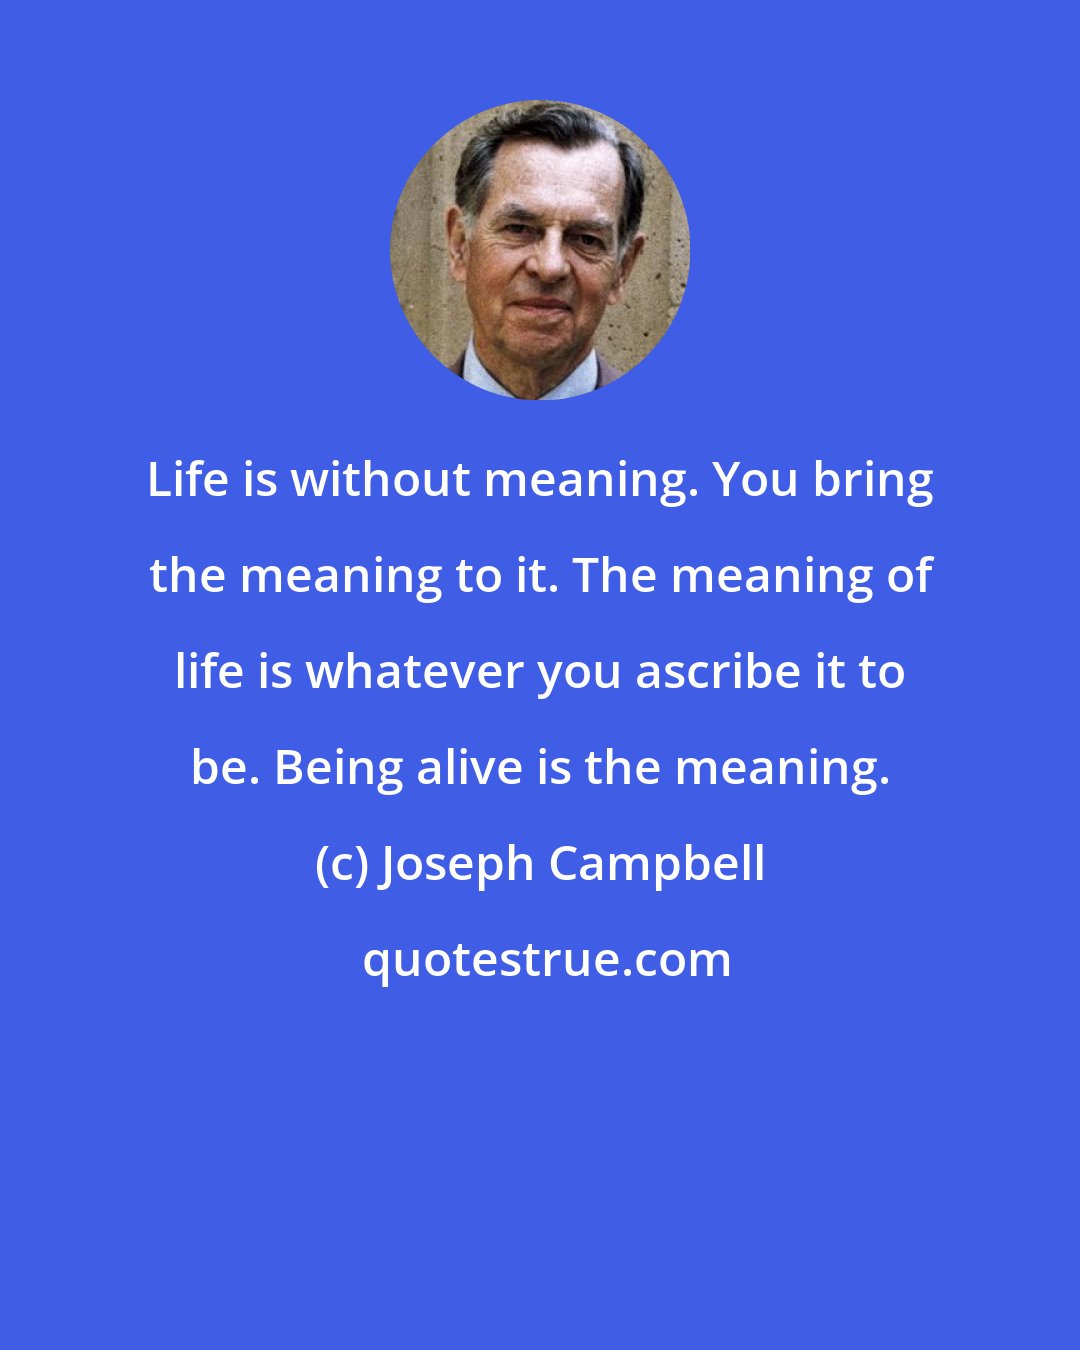 Joseph Campbell: Life is without meaning. You bring the meaning to it. The meaning of life is whatever you ascribe it to be. Being alive is the meaning.